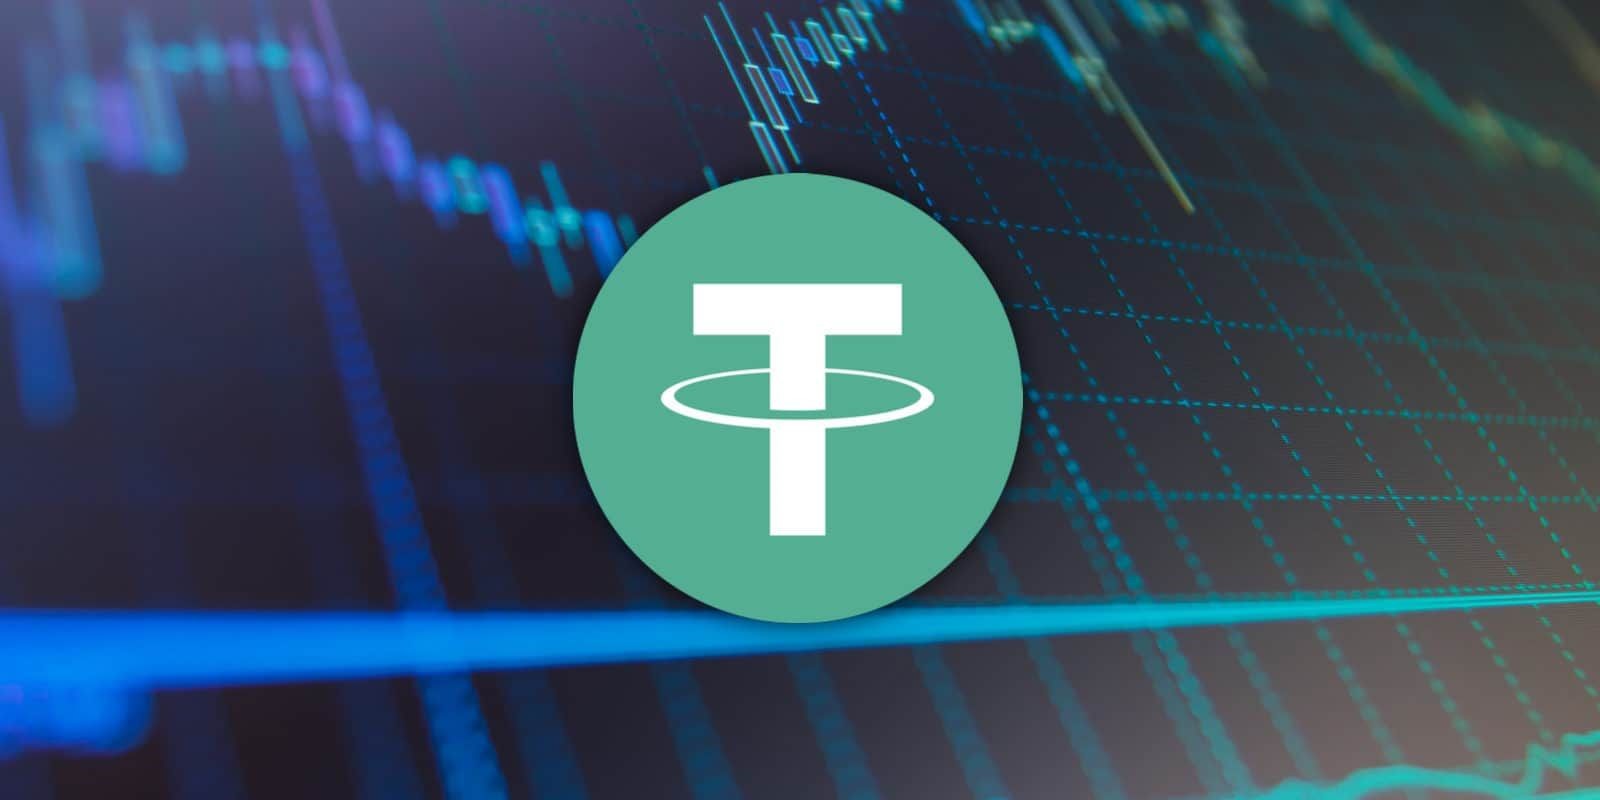 what is tether